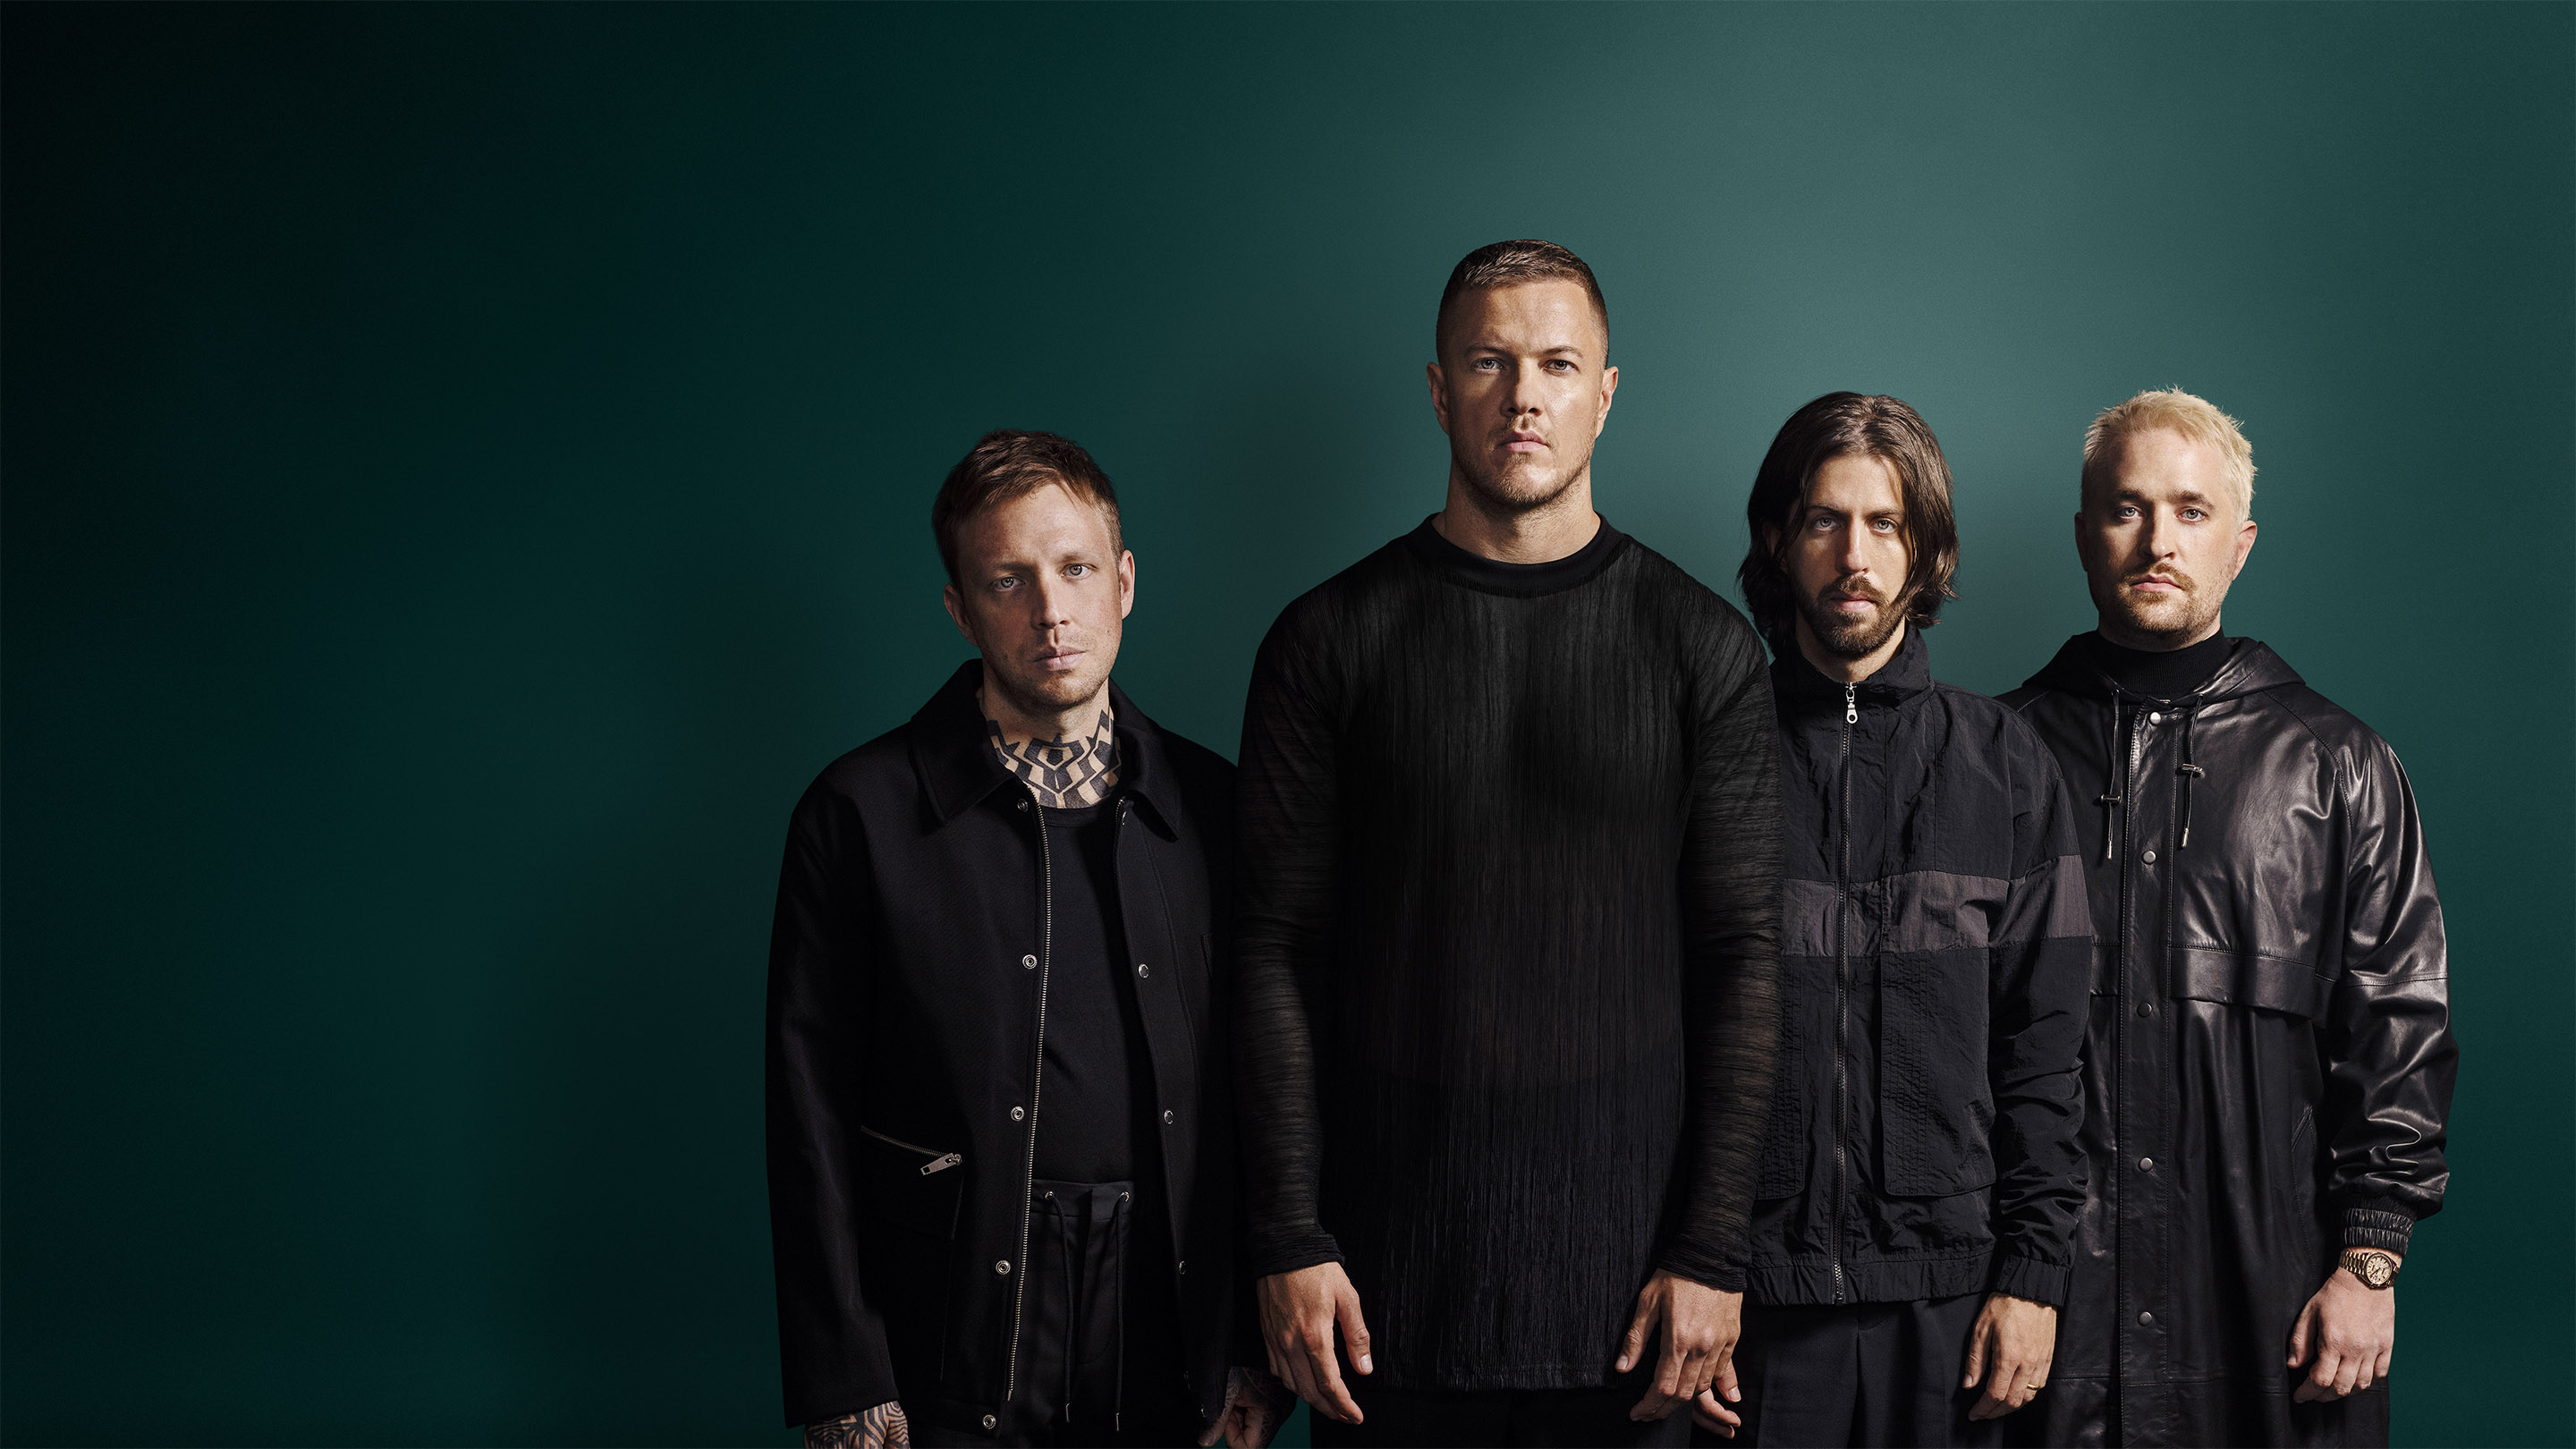 https://www.coca-cola.com/content/dam/onexp/global/central/offerings/coke-studio/artists/2_Imagine_Dragons_by_Eric_Ray_Davidson_GREEN_04_16-9.jpg